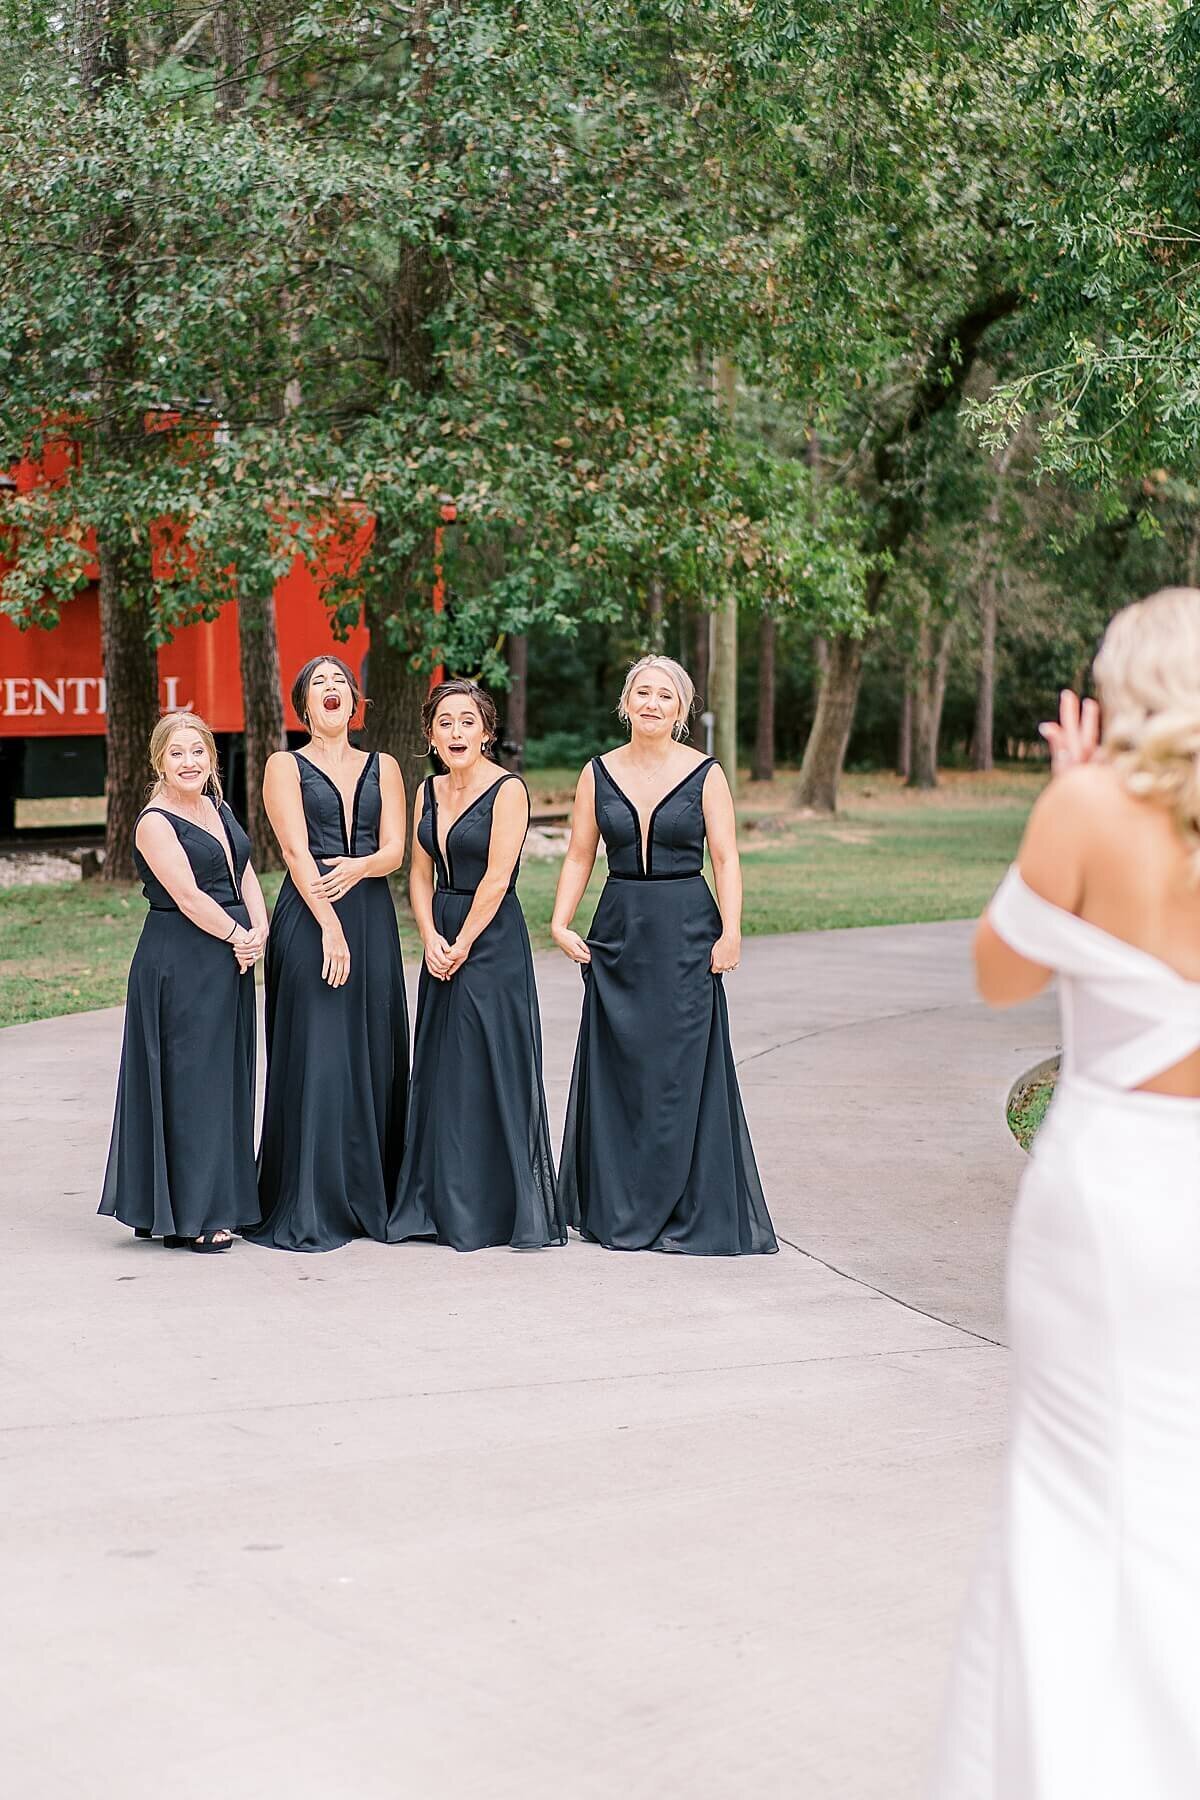 Bridesmaids first look at the Annex Wedding Venue photographed by Alicia Yarrish Photography